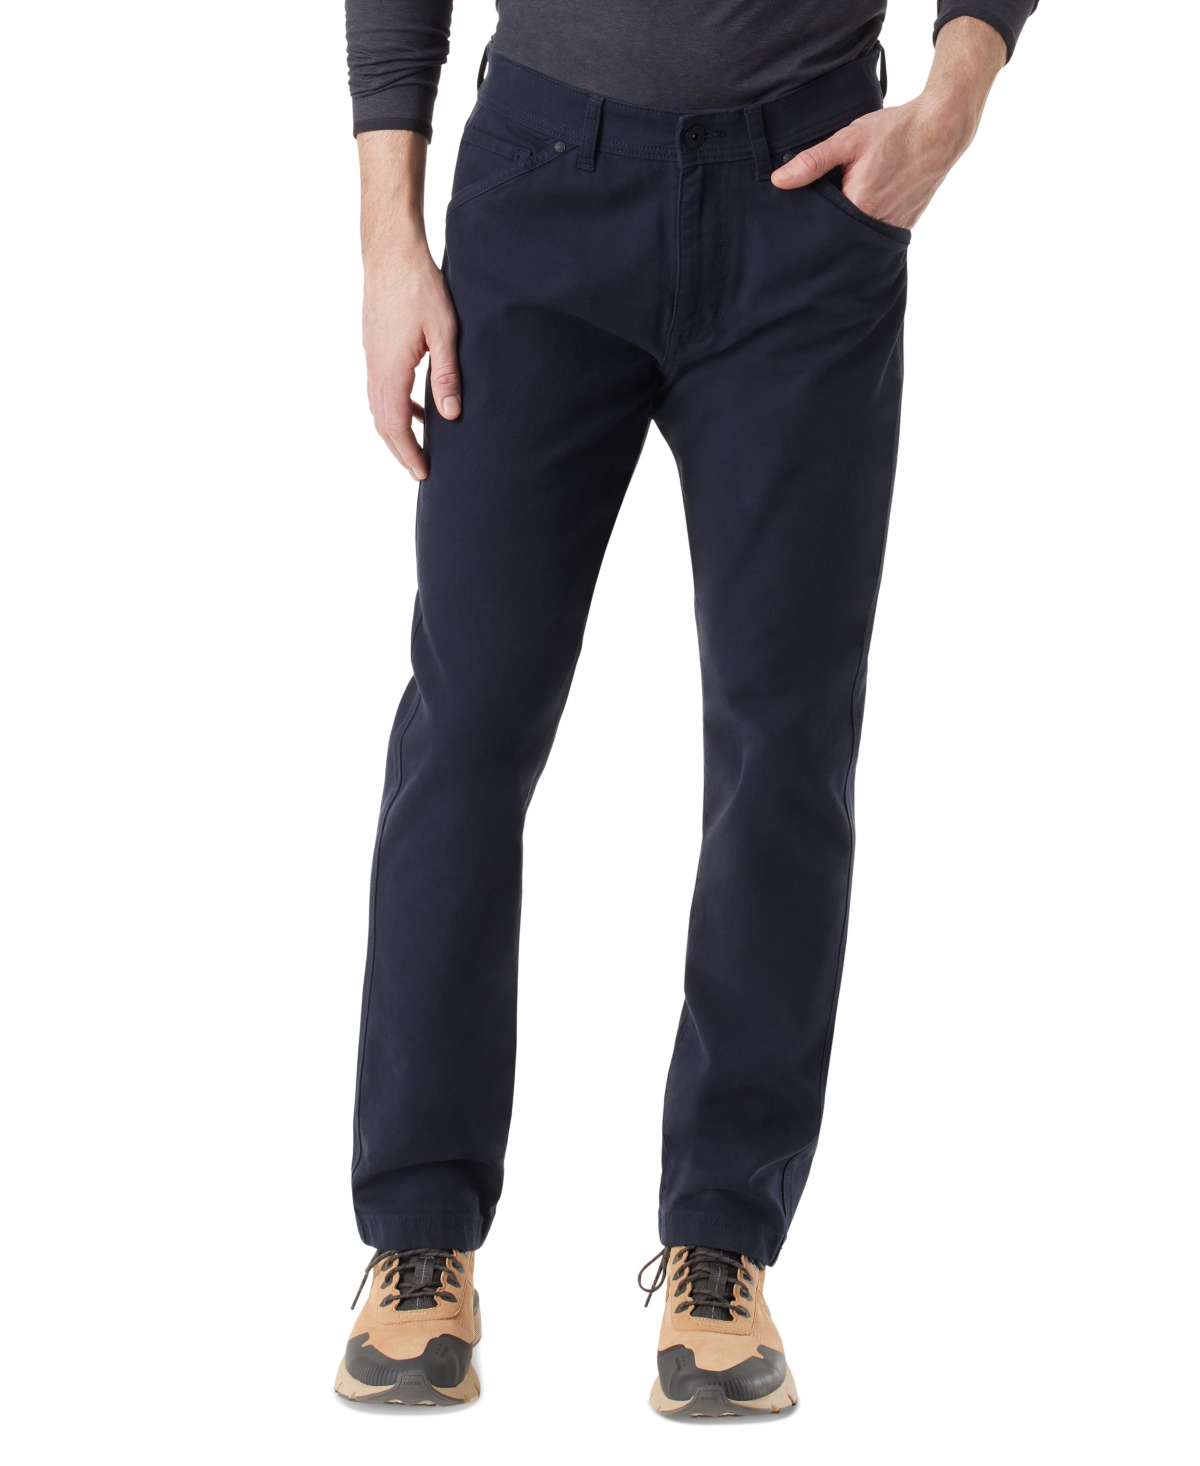 Men's Everyday Slim-Straight Fit Stretch Canvas Pants - Drizzle